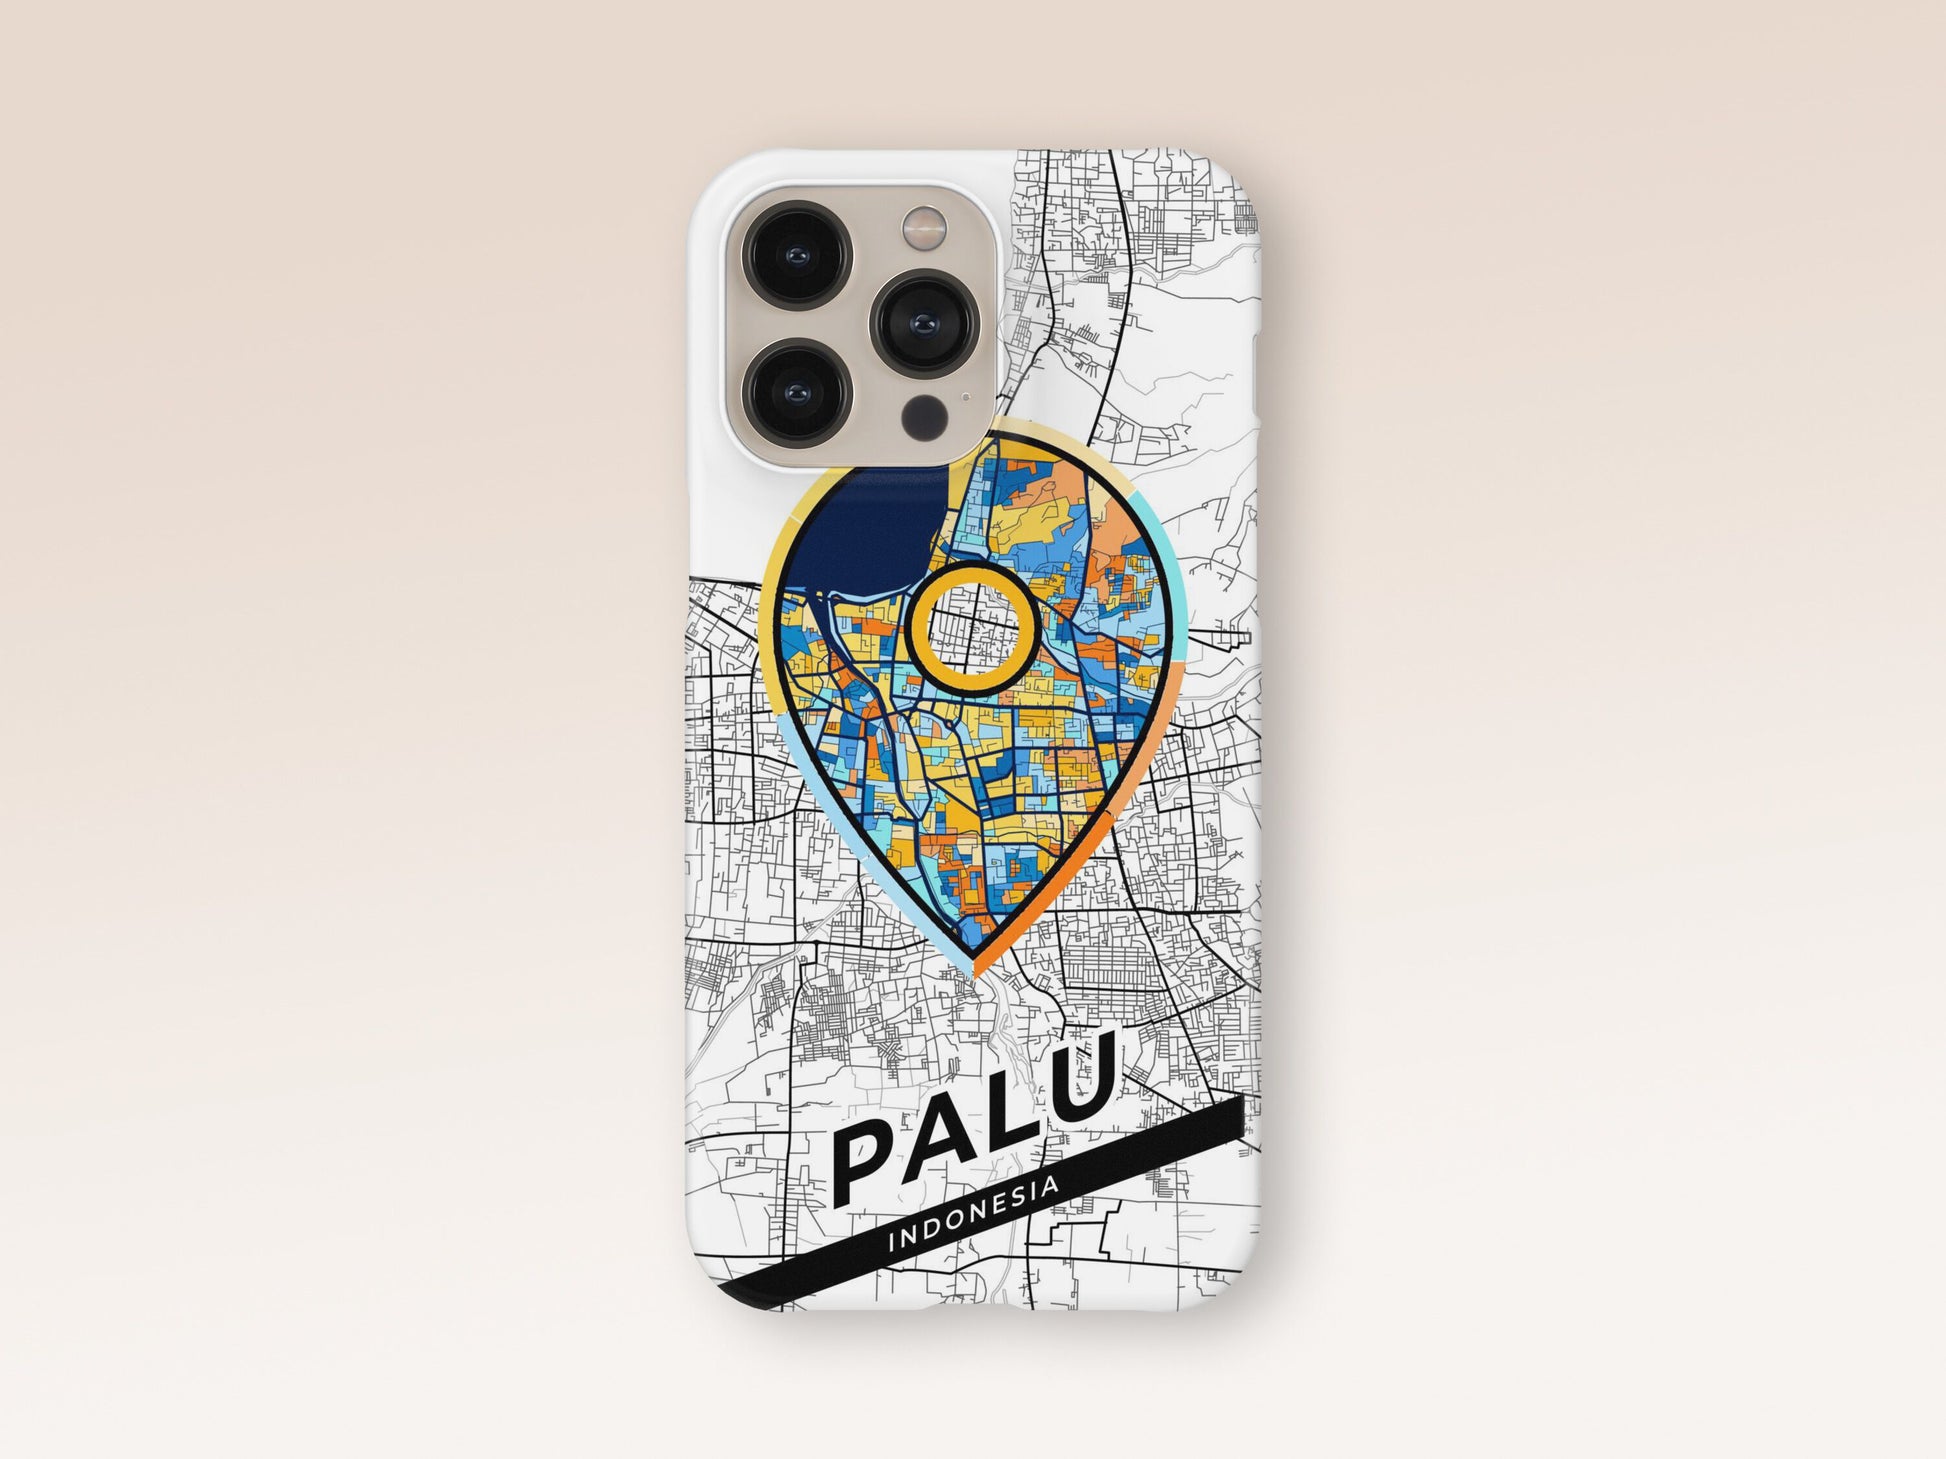 Palu Indonesia slim phone case with colorful icon 1